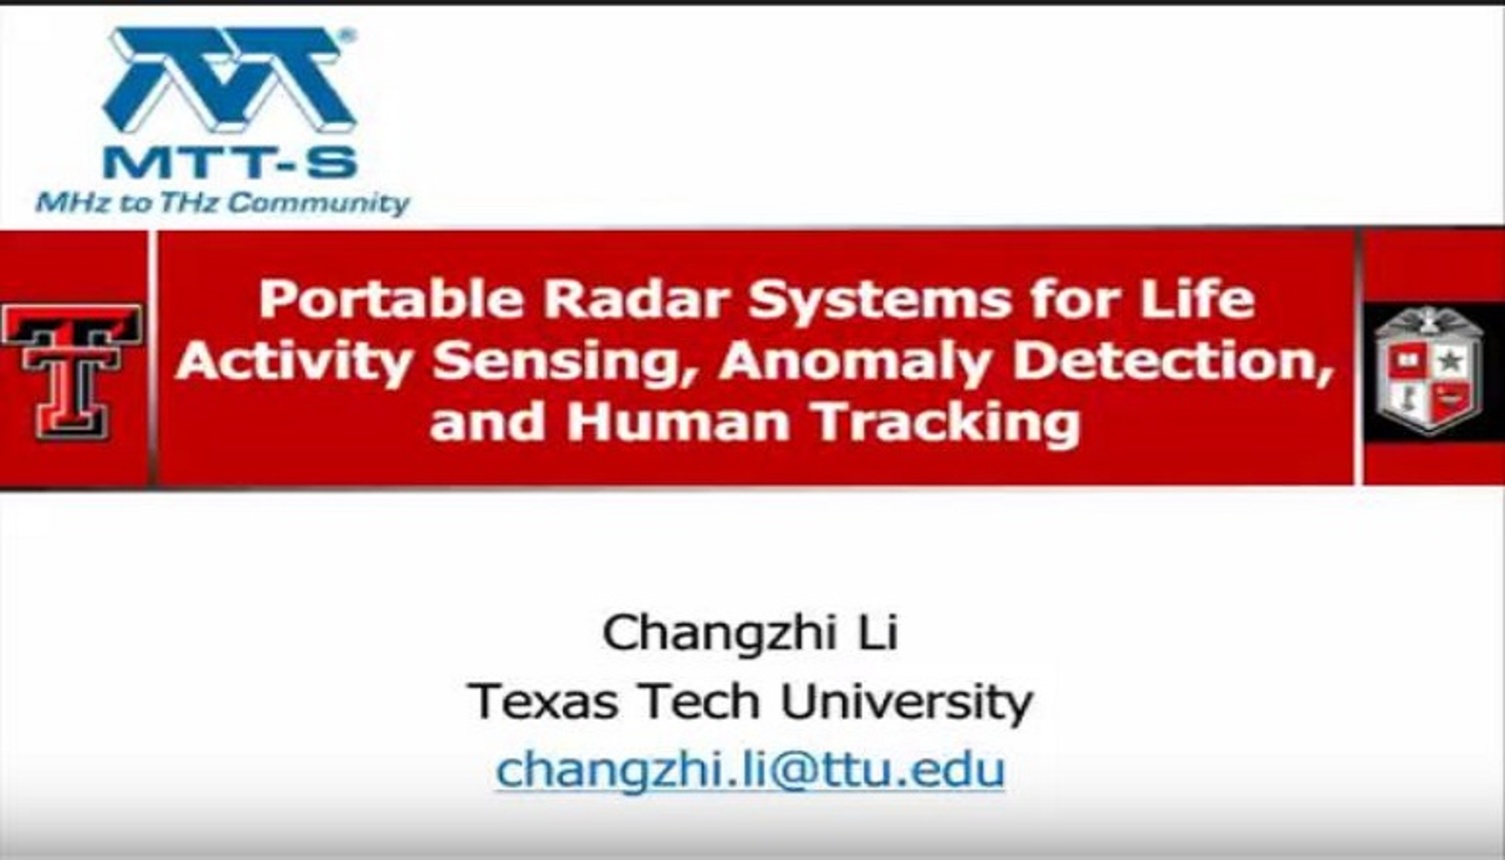 Portable Radar Systems for Life Activity Sensing, Anomaly Detection, and Human Tracking